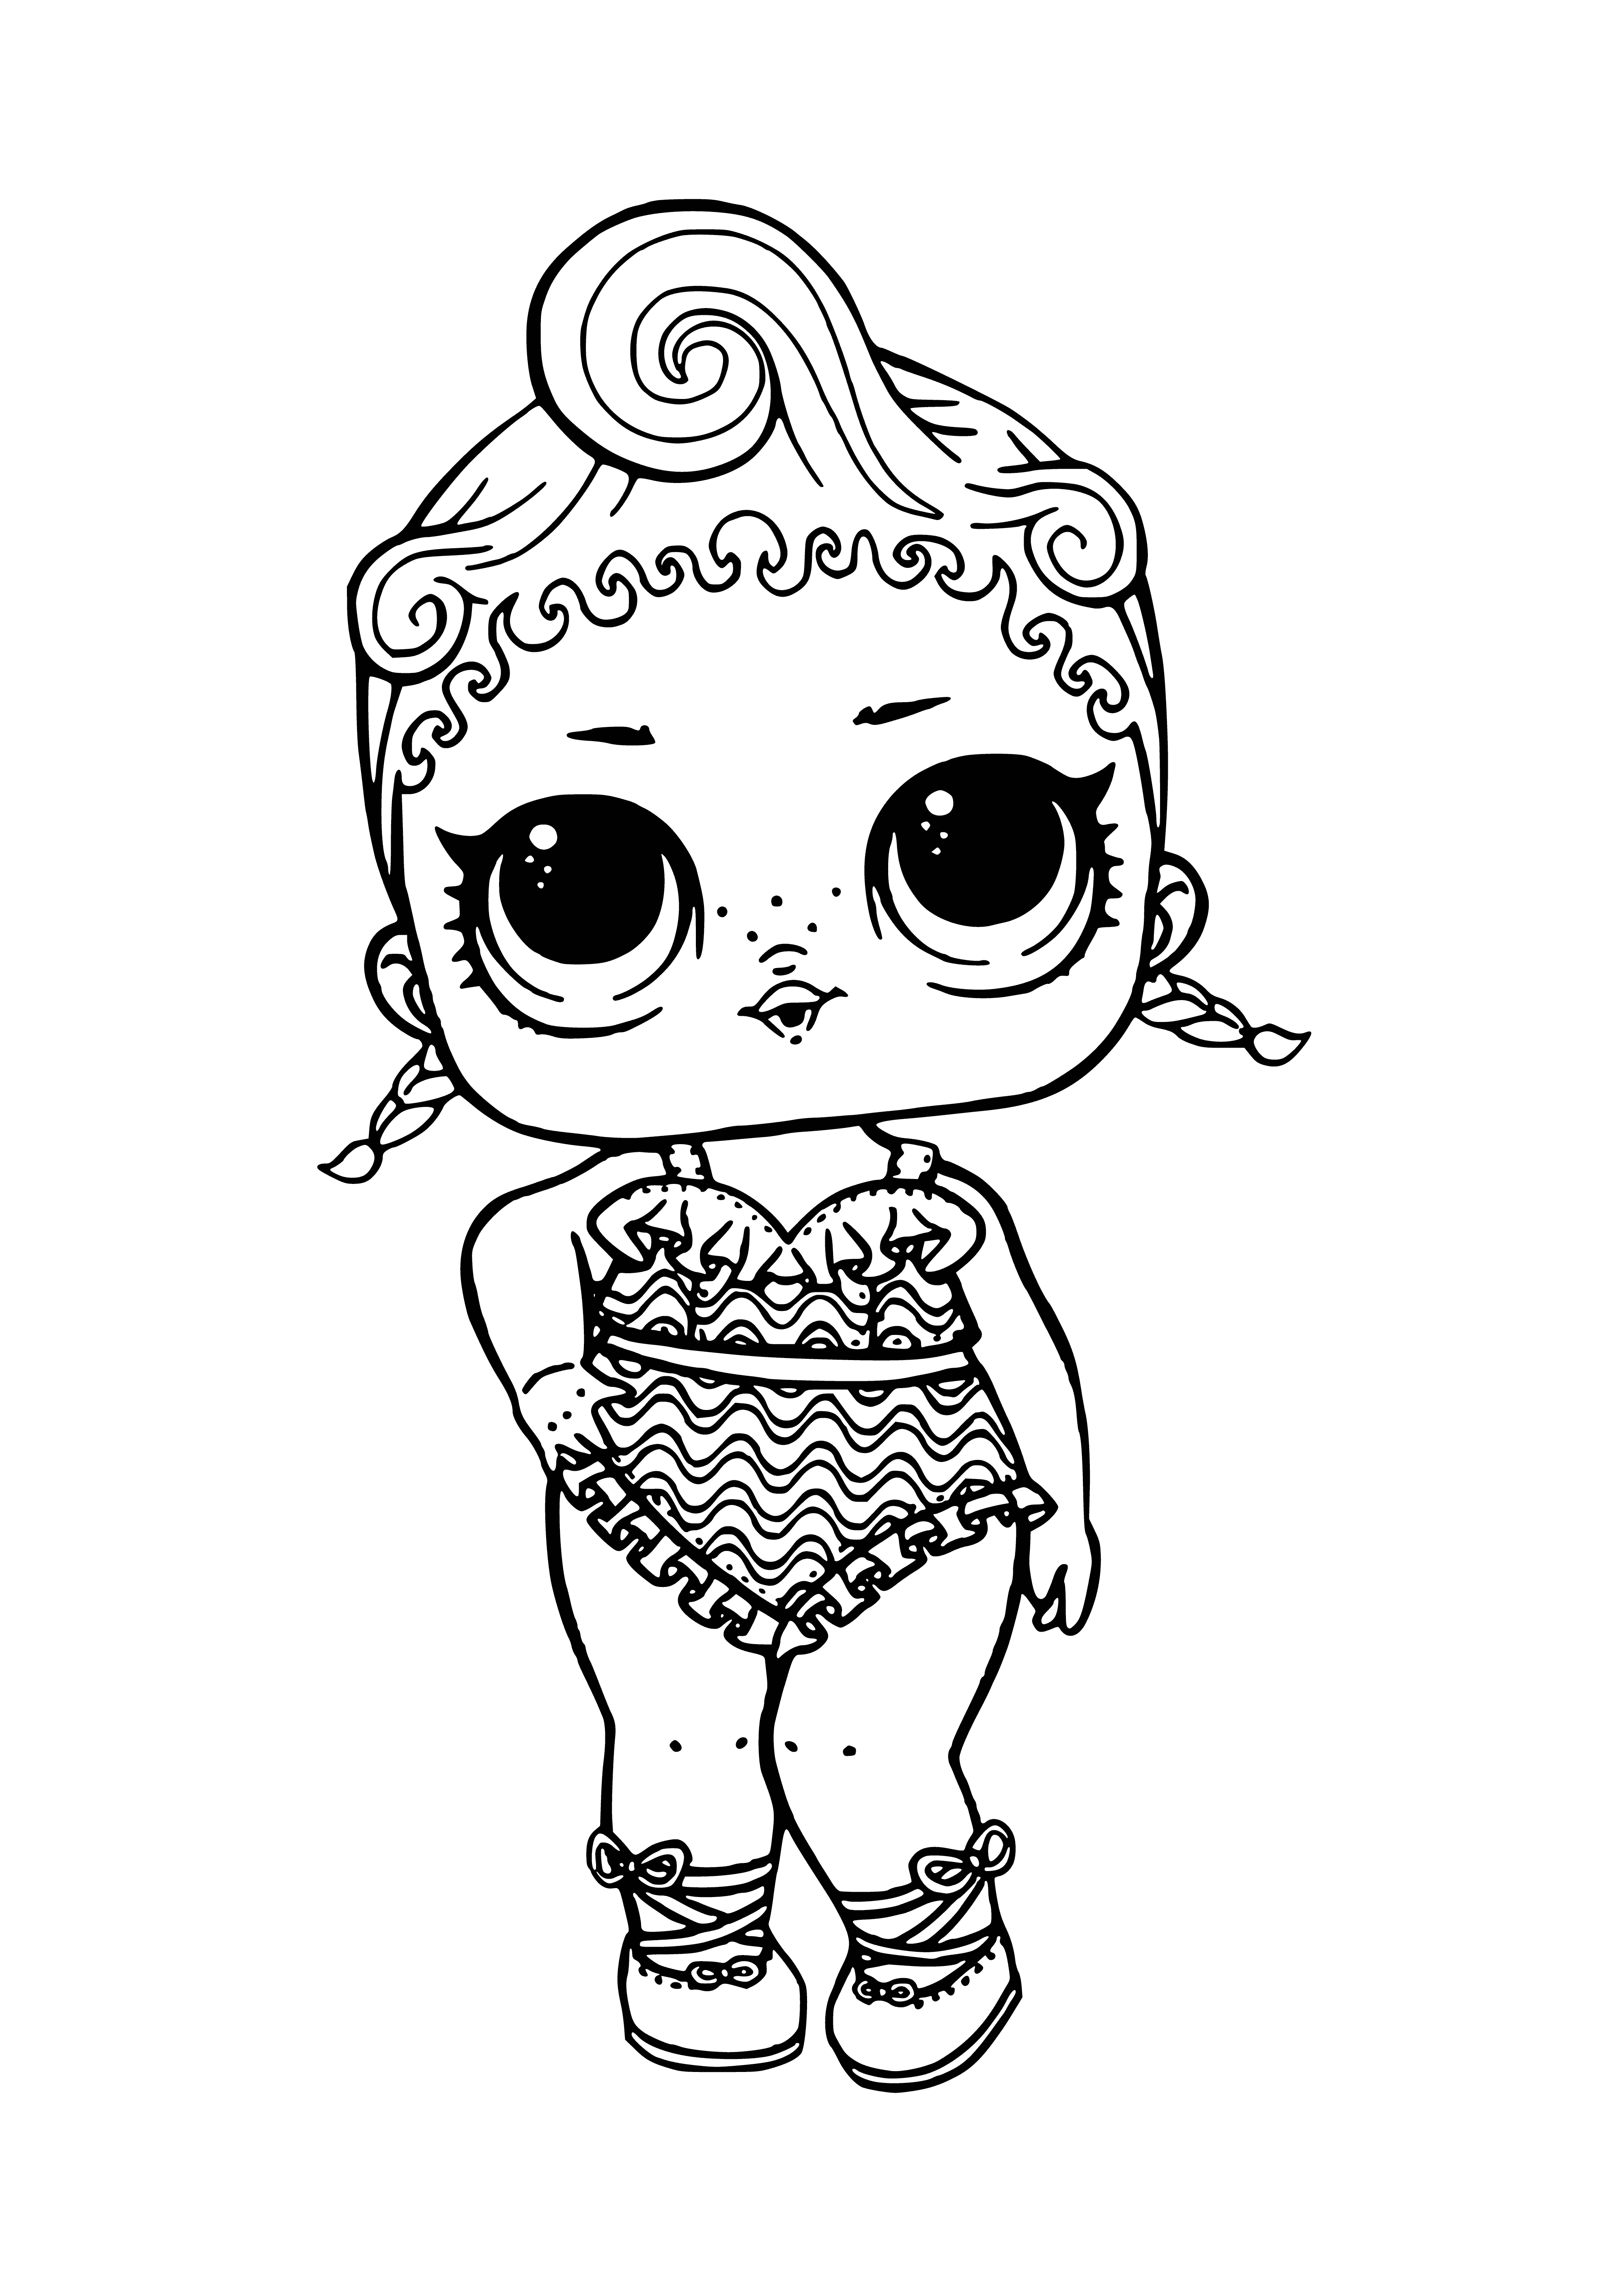 coloring page: Adorable L.O.L doll has blue skin, white eyes, blonde hair, blue dress with white polka dots, and white bracelet on her right wrist!